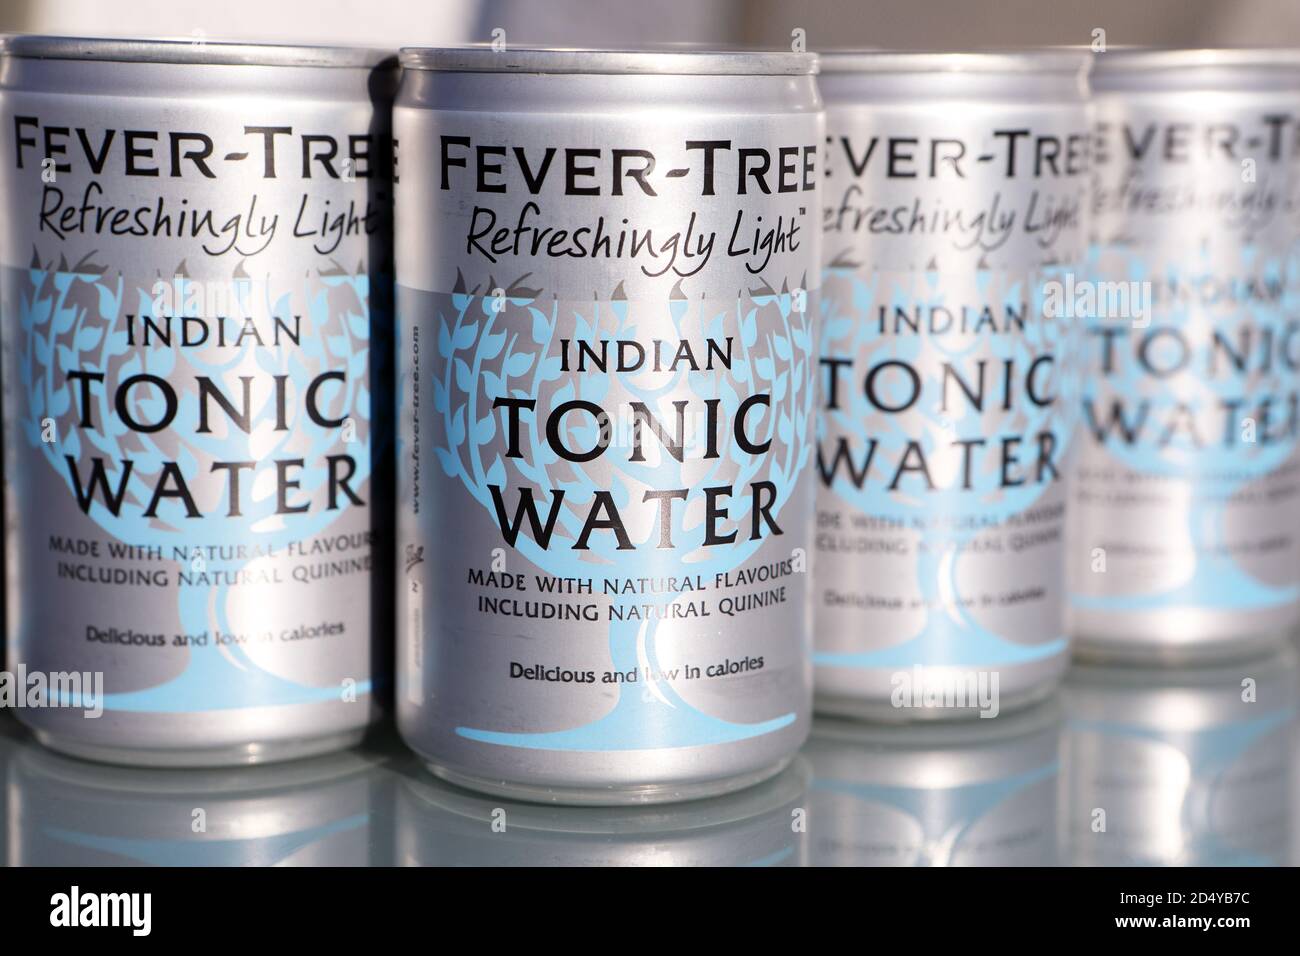 Cans of Fever-Tree tonic water Stock Photo